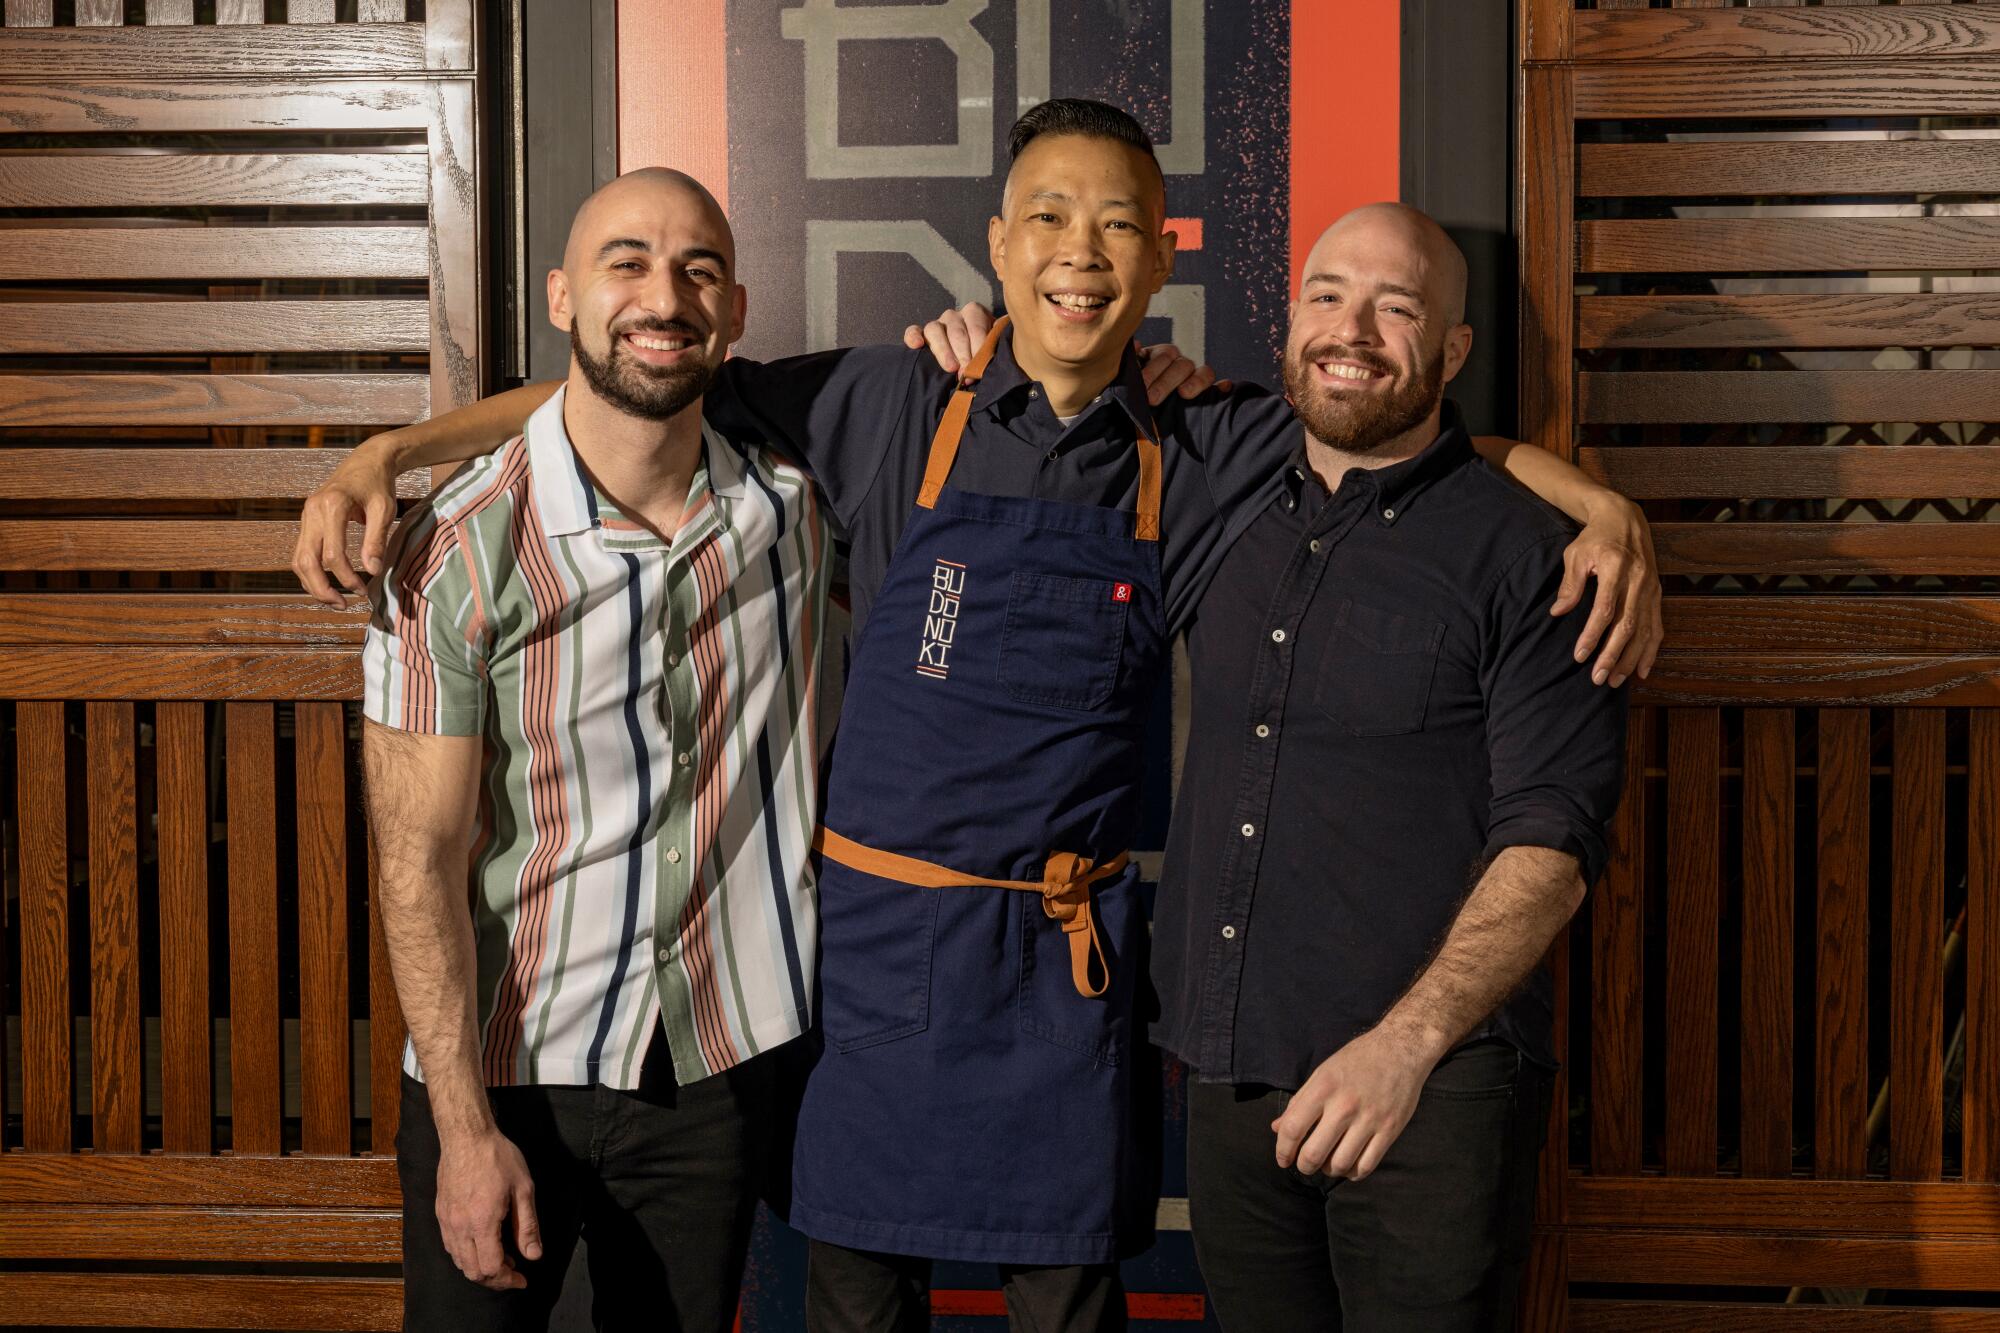 Three men stand smiling with their arms around one another's shoulders